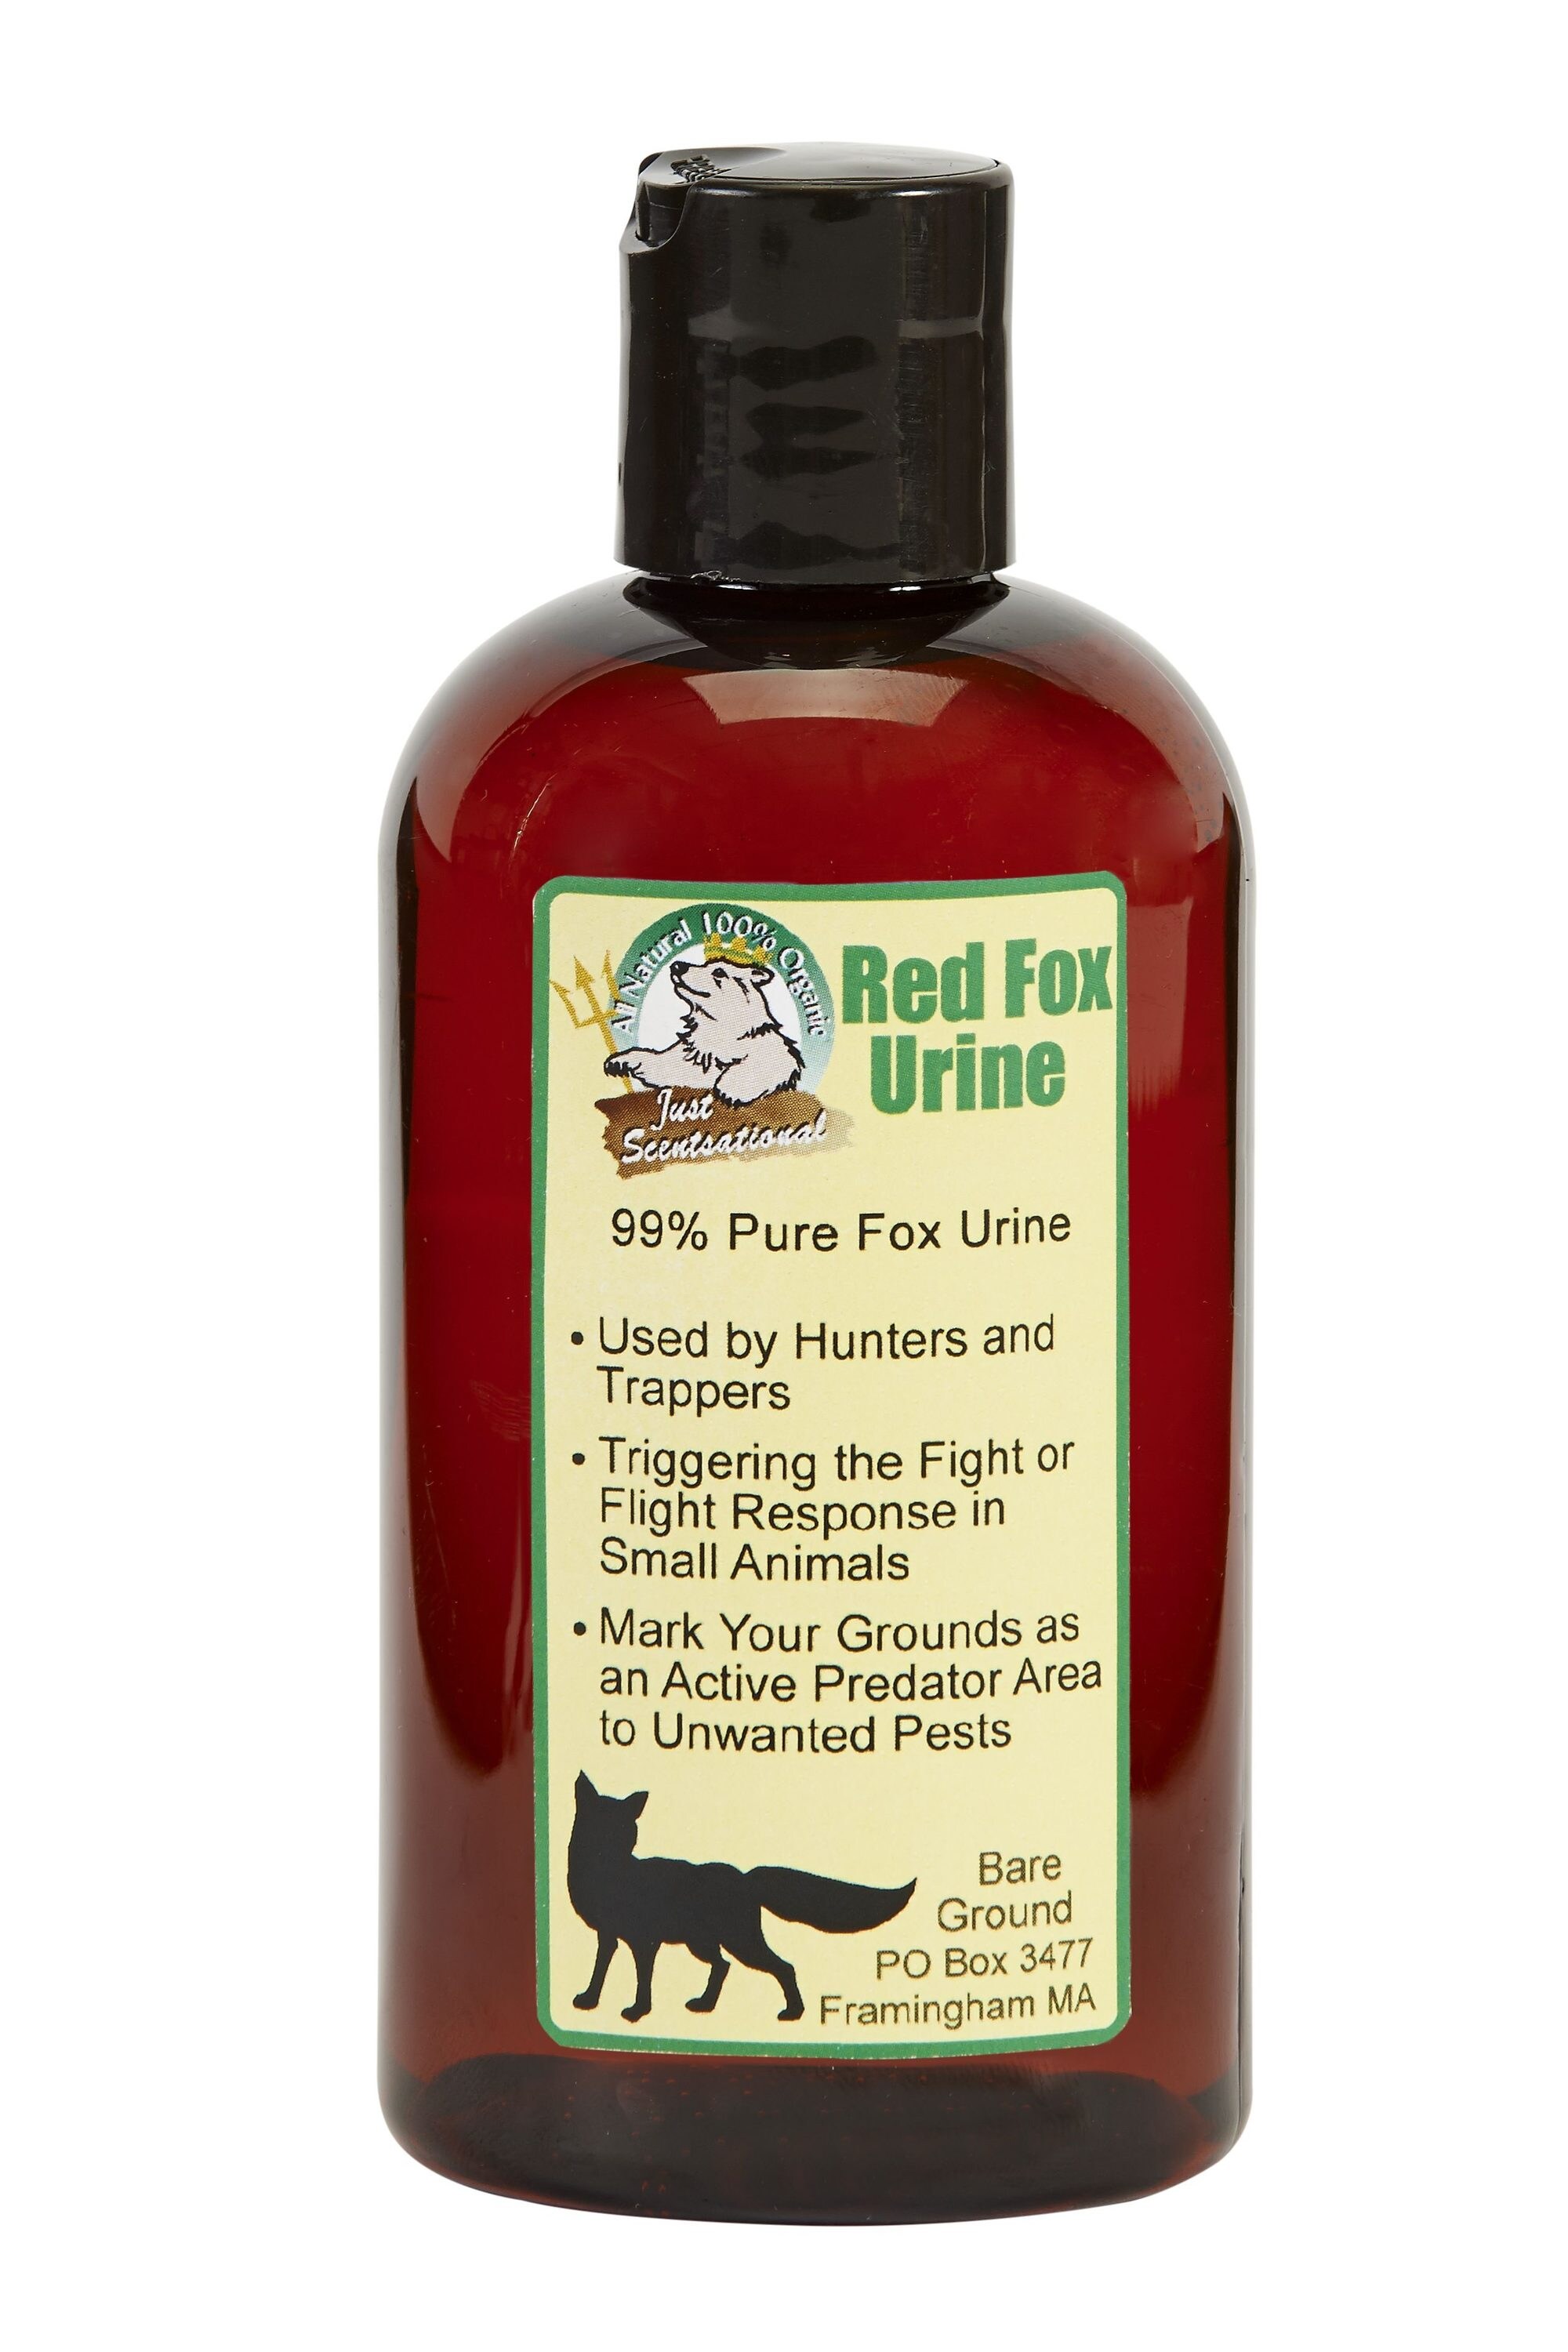 8 Ounce Bottle of Coyote Urine Just Scentsational Scares small animals away 